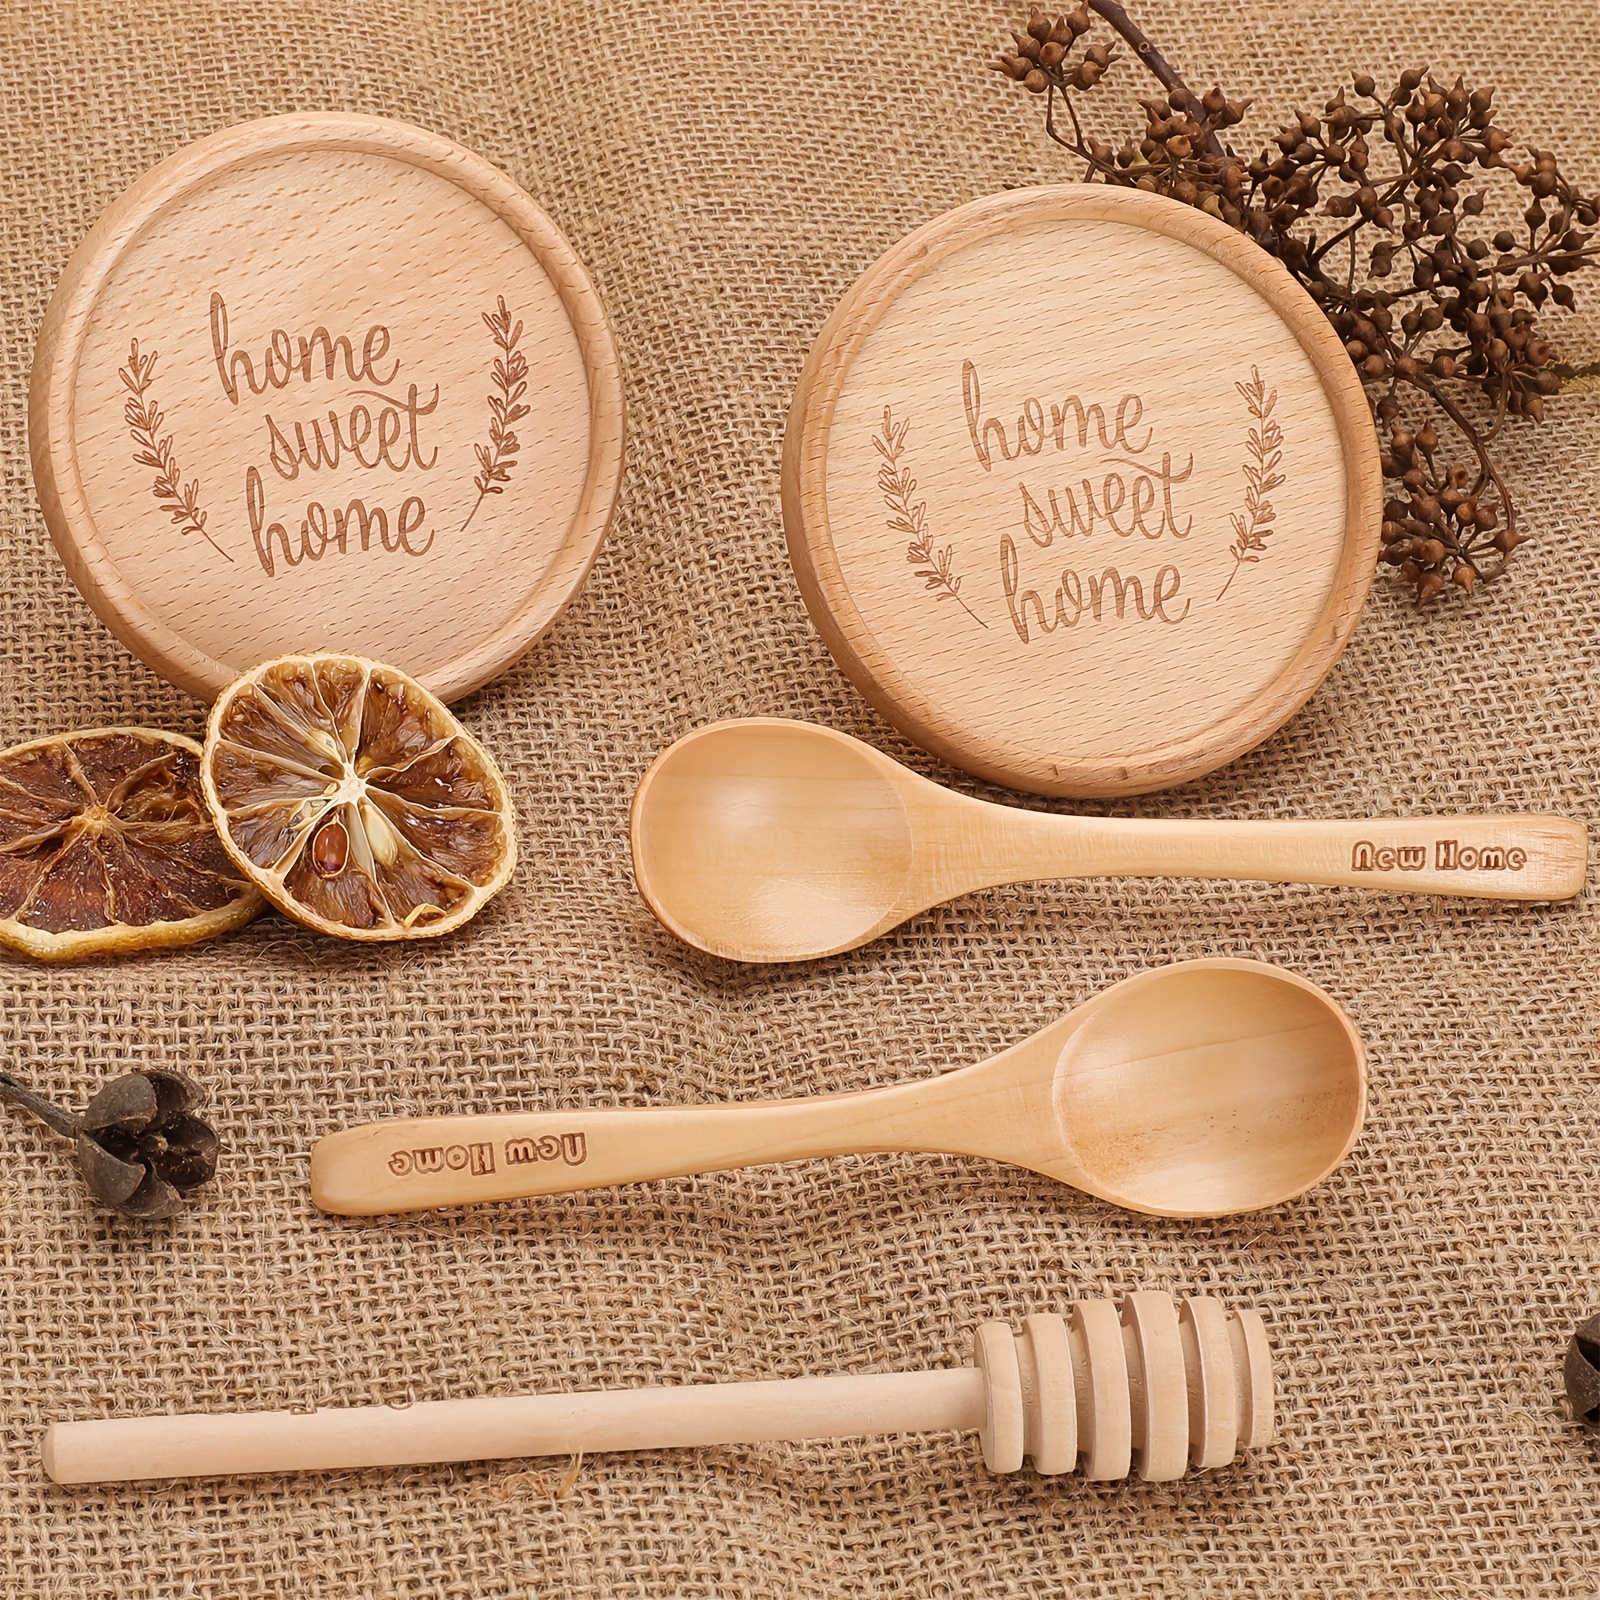 House Warming Gifts New Home,Housewarming Gifts for New House, Housewarming  Gift Baskets for Couple,New Home Gifts for Home,Home Sweet Home Bamboo